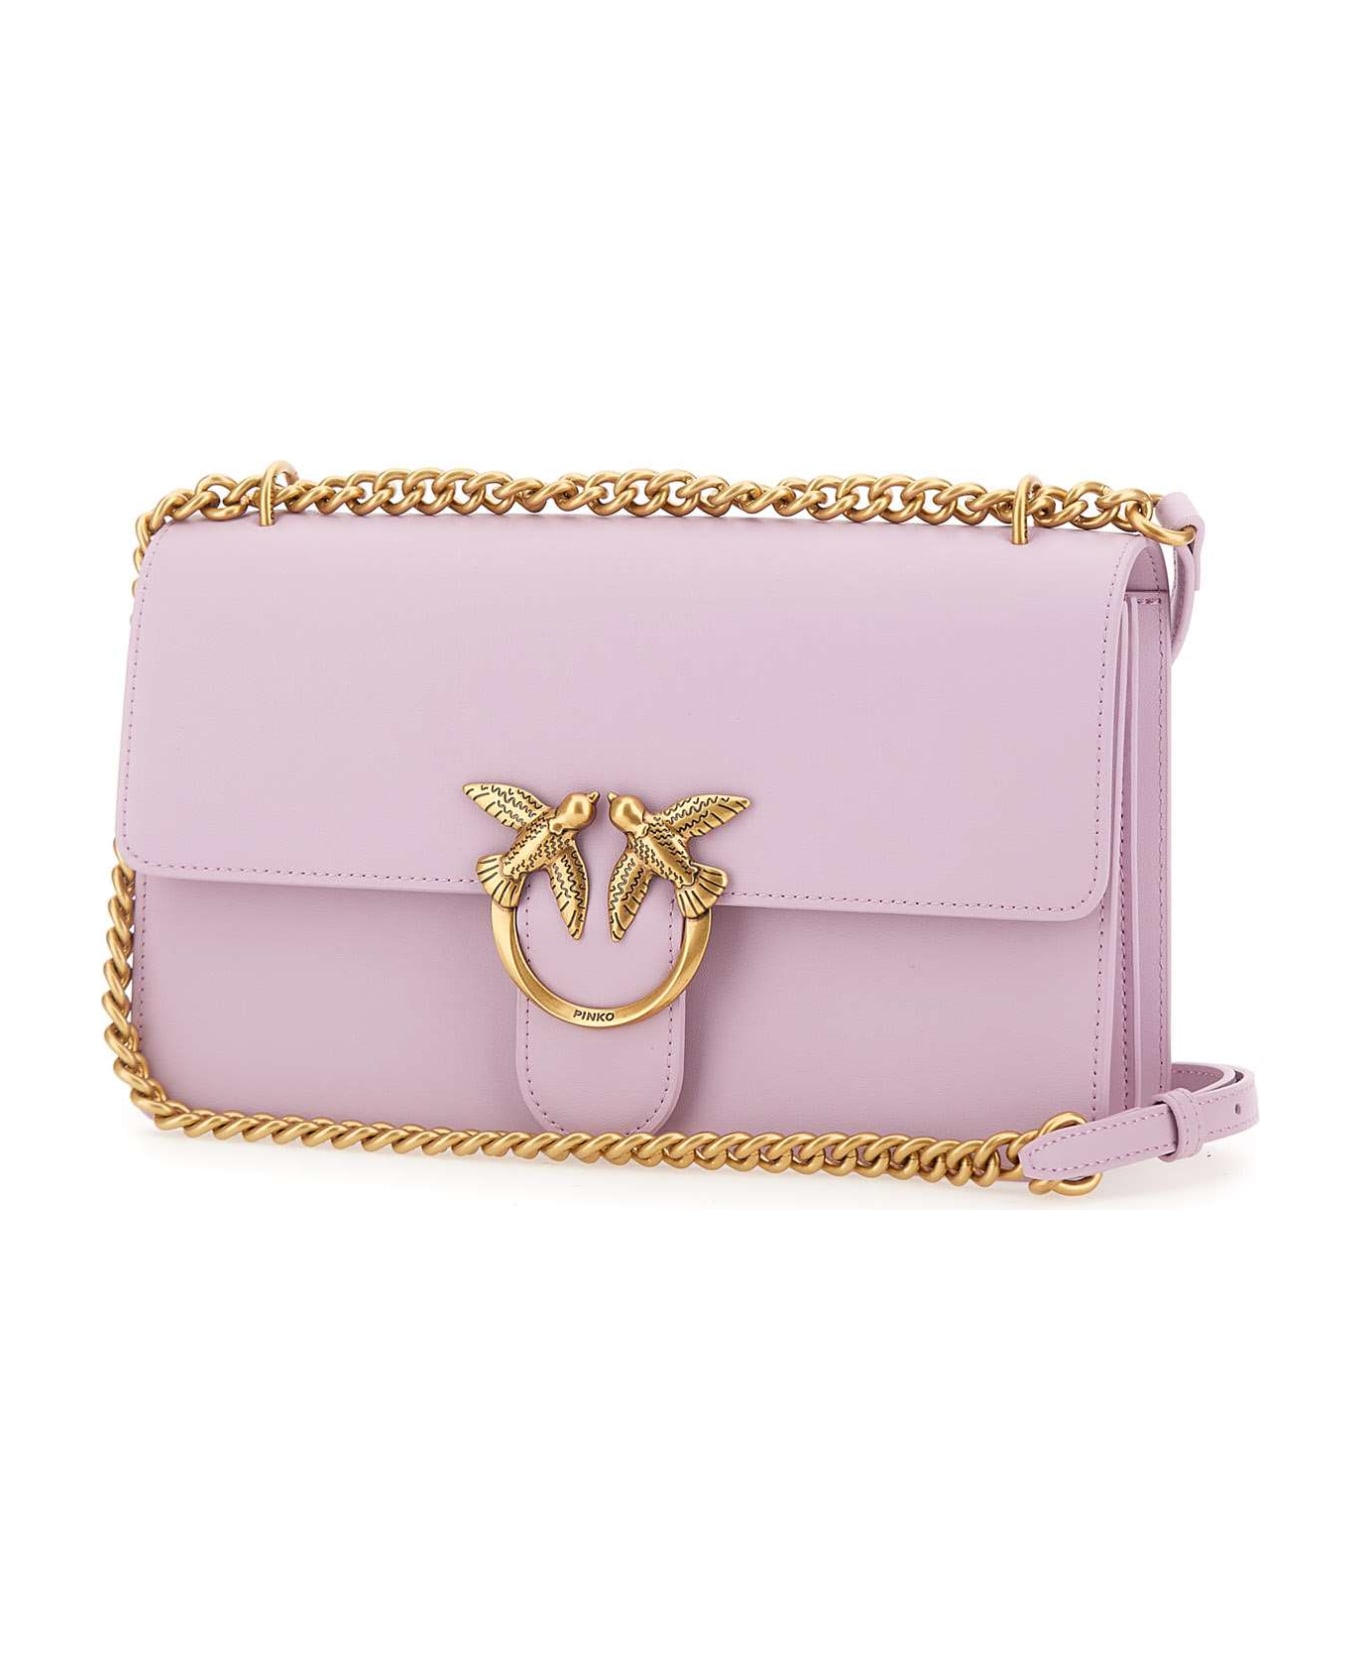 Pinko "love One Classic" Leather Bag - LILAC